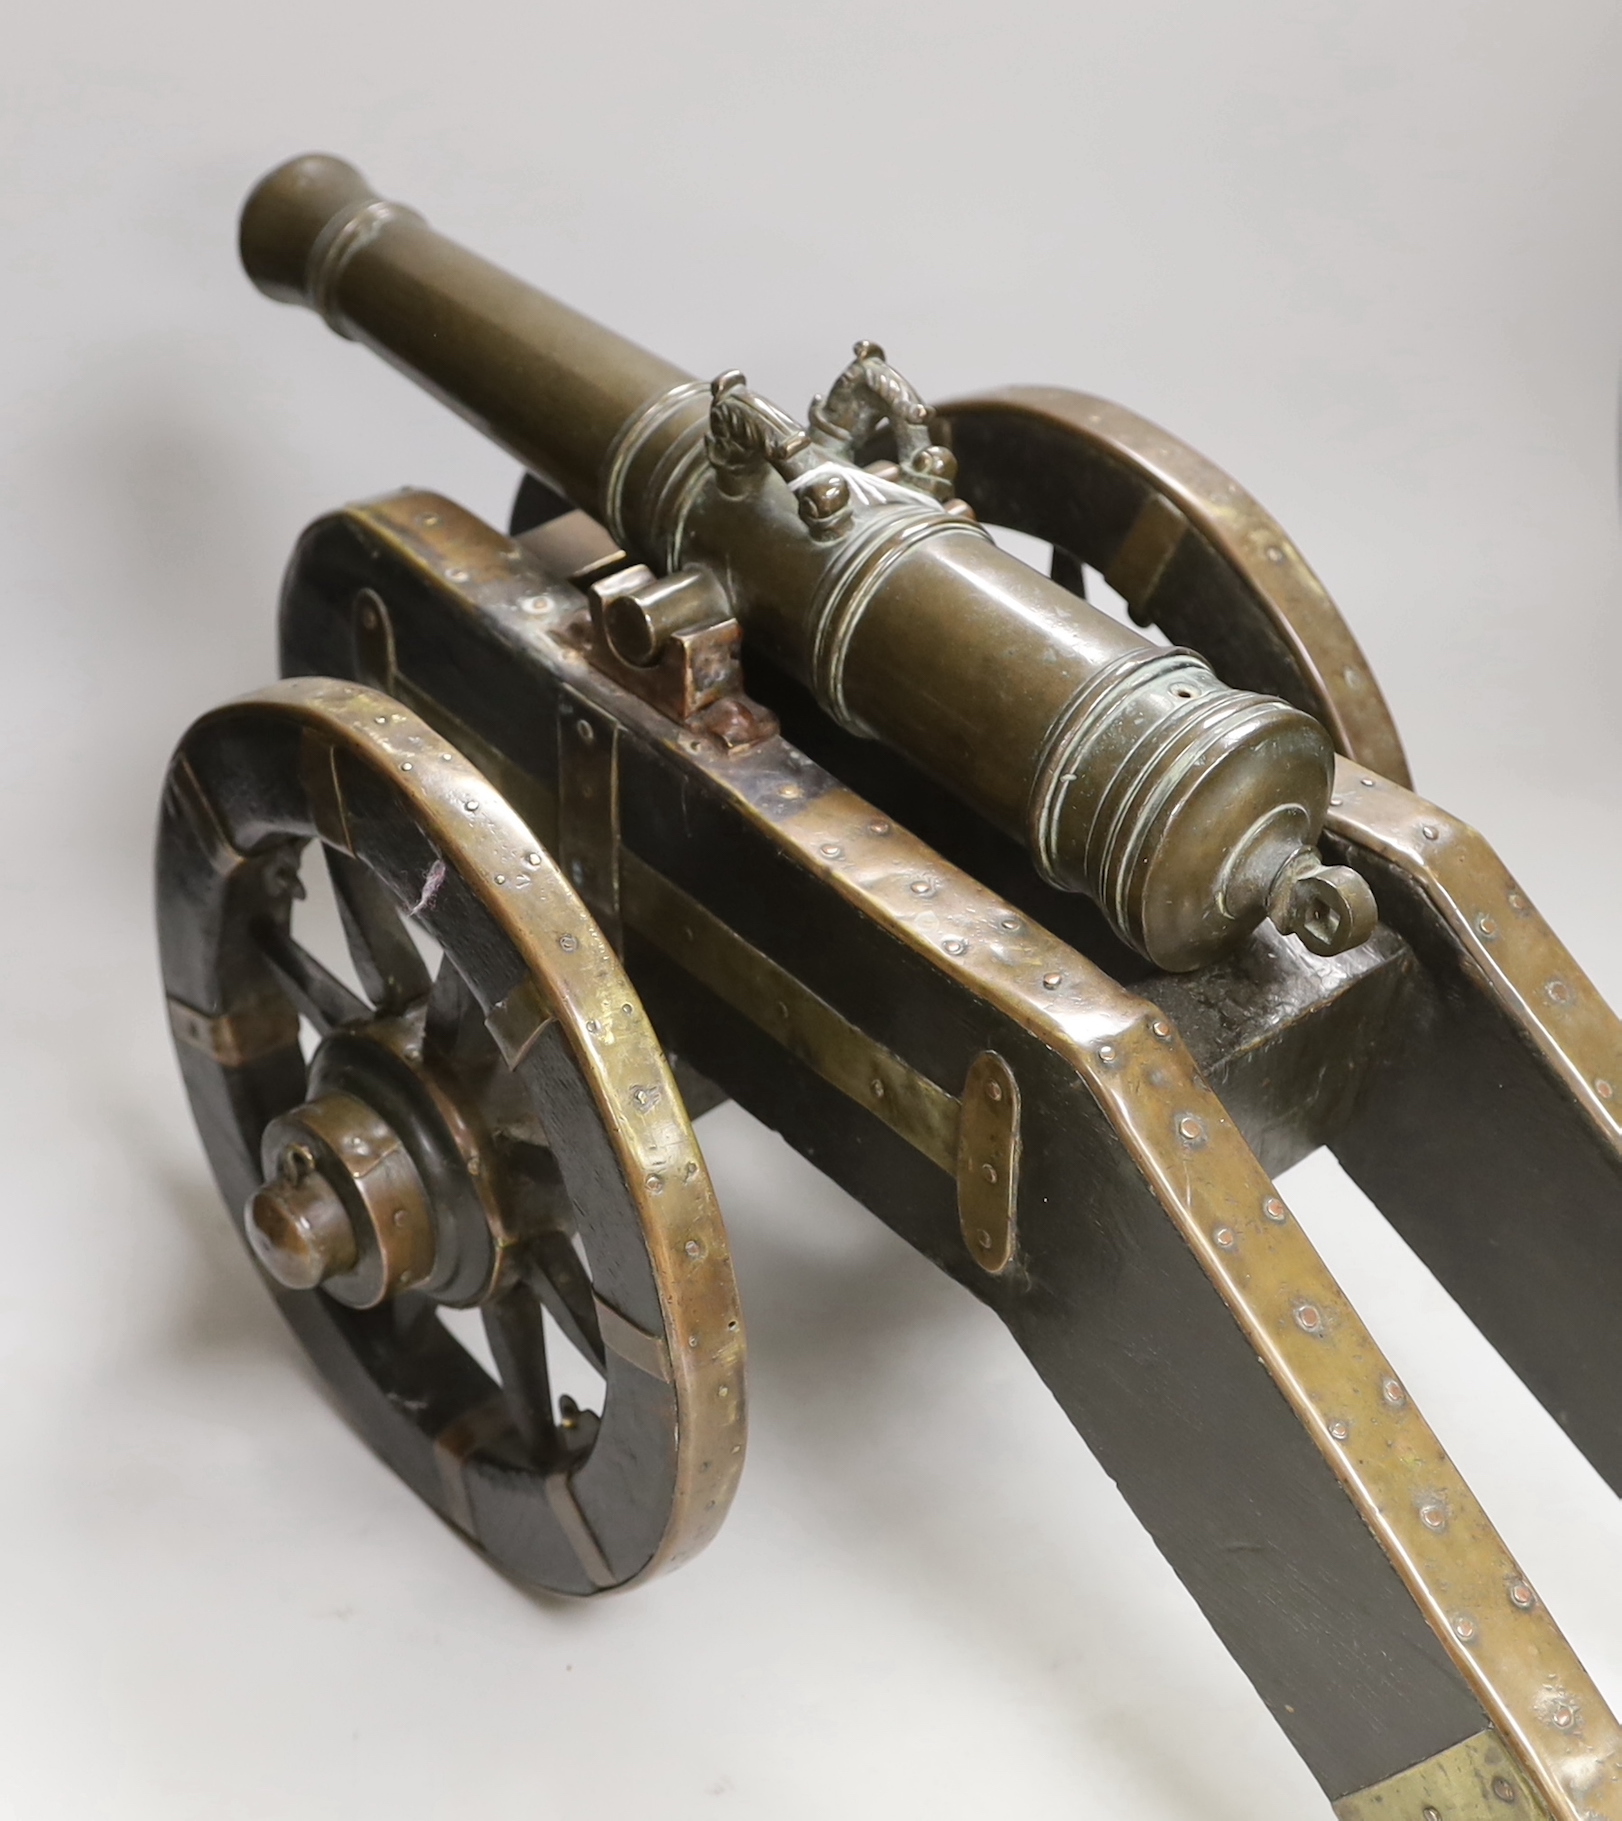 A bronze starting canon and truck, barrel 37cm